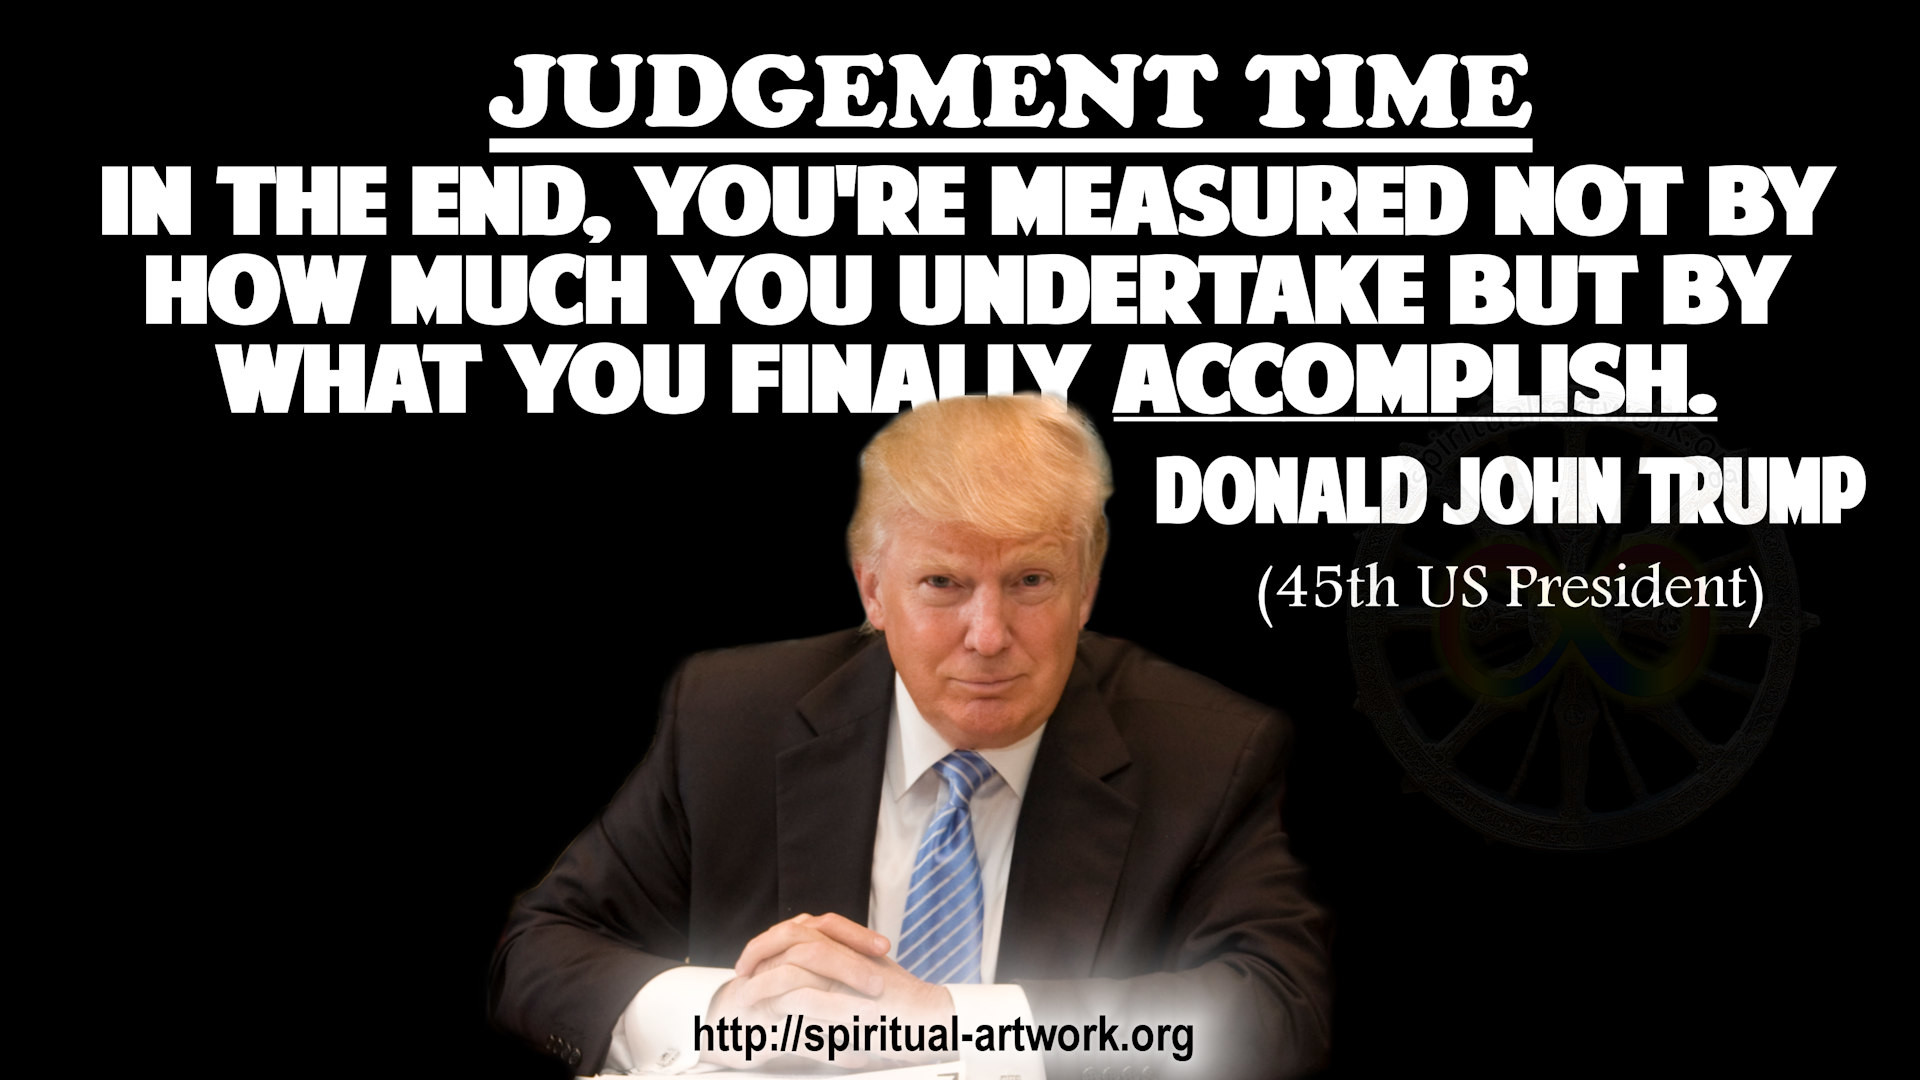 1920x1080 Donald Trump- In the end, you're measured not by how much you